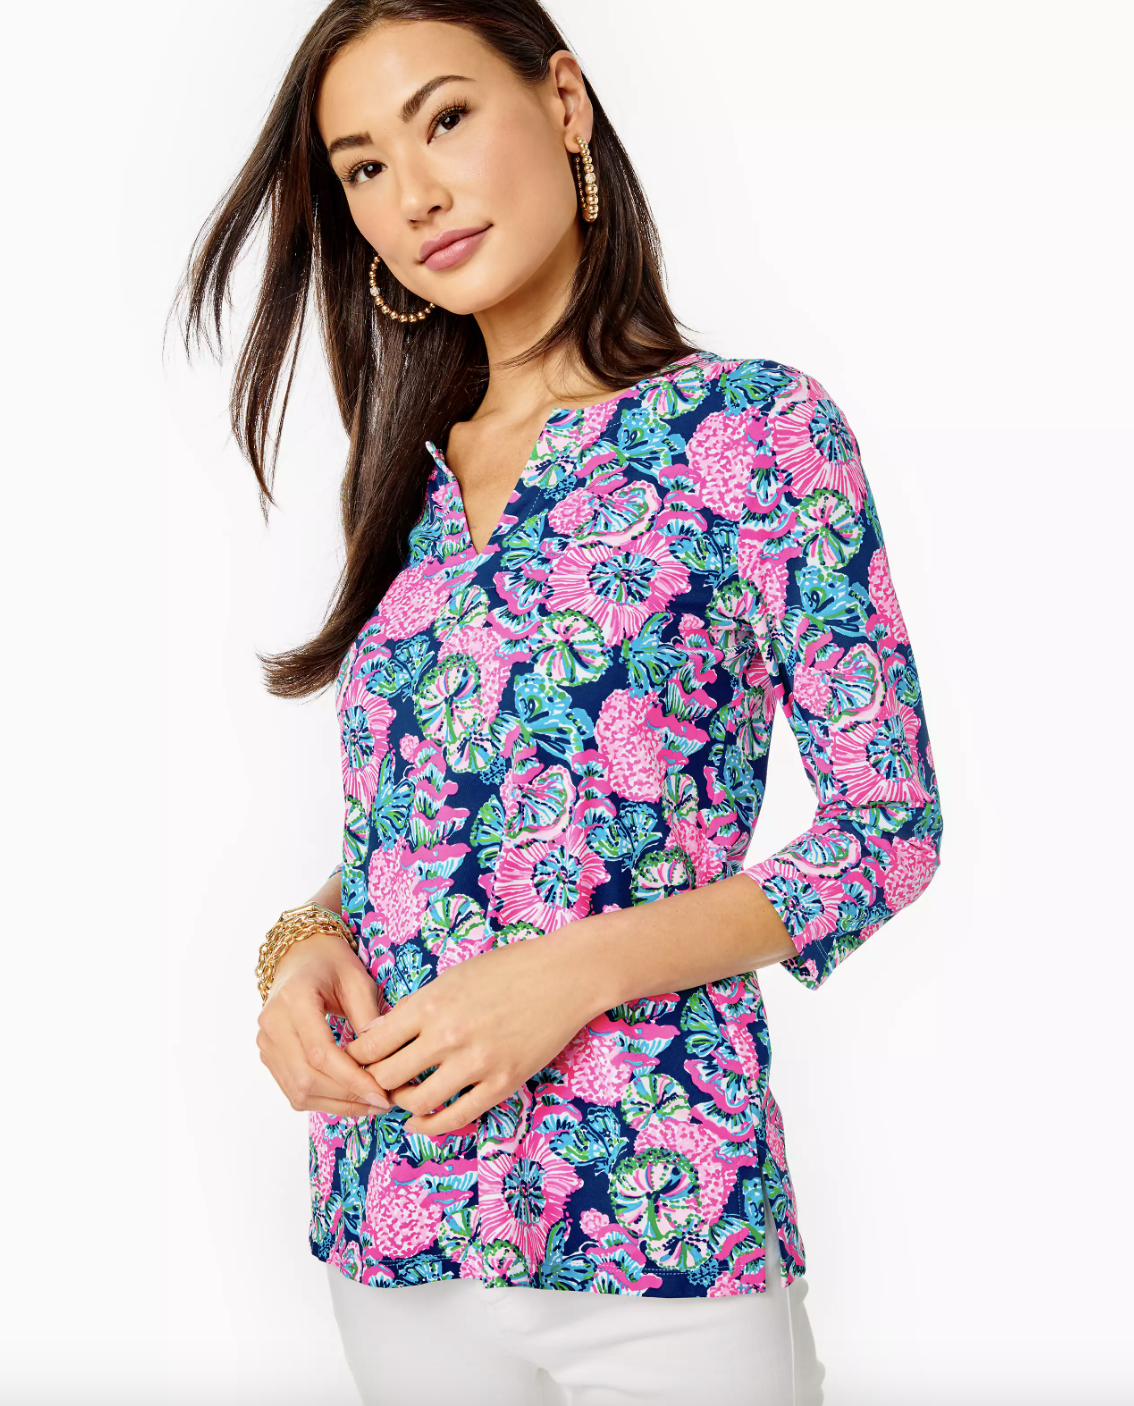 UPF 50+ KARINA TUNIC - SHROOM WITH A VIEW - Lilly Pulitzer Store - Life ...